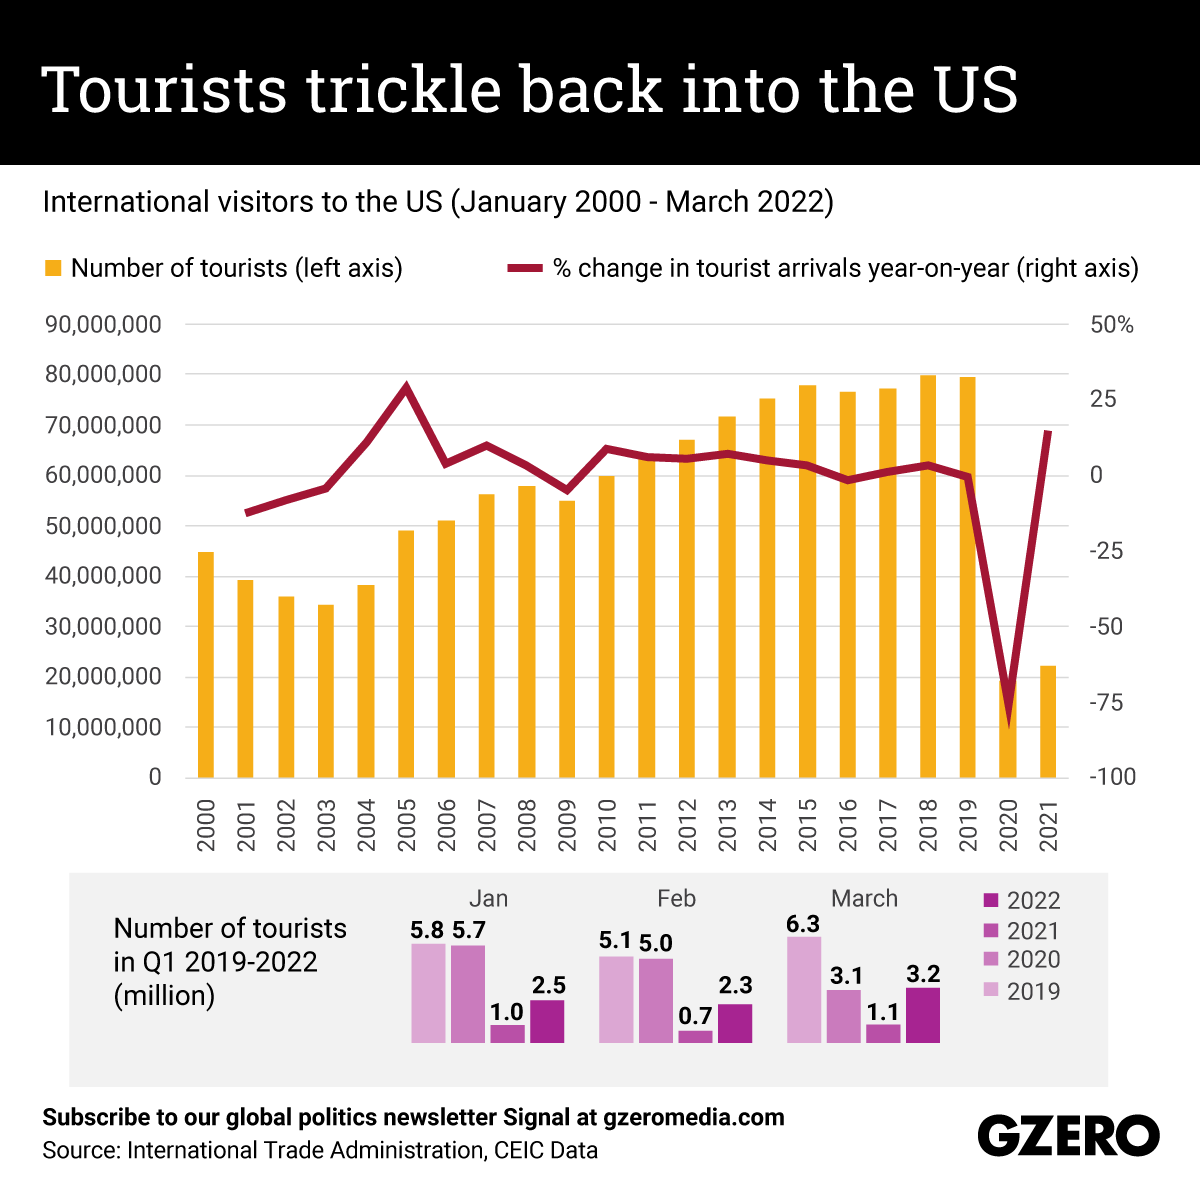 The Graphic Truth: Tourists tricked back into the US